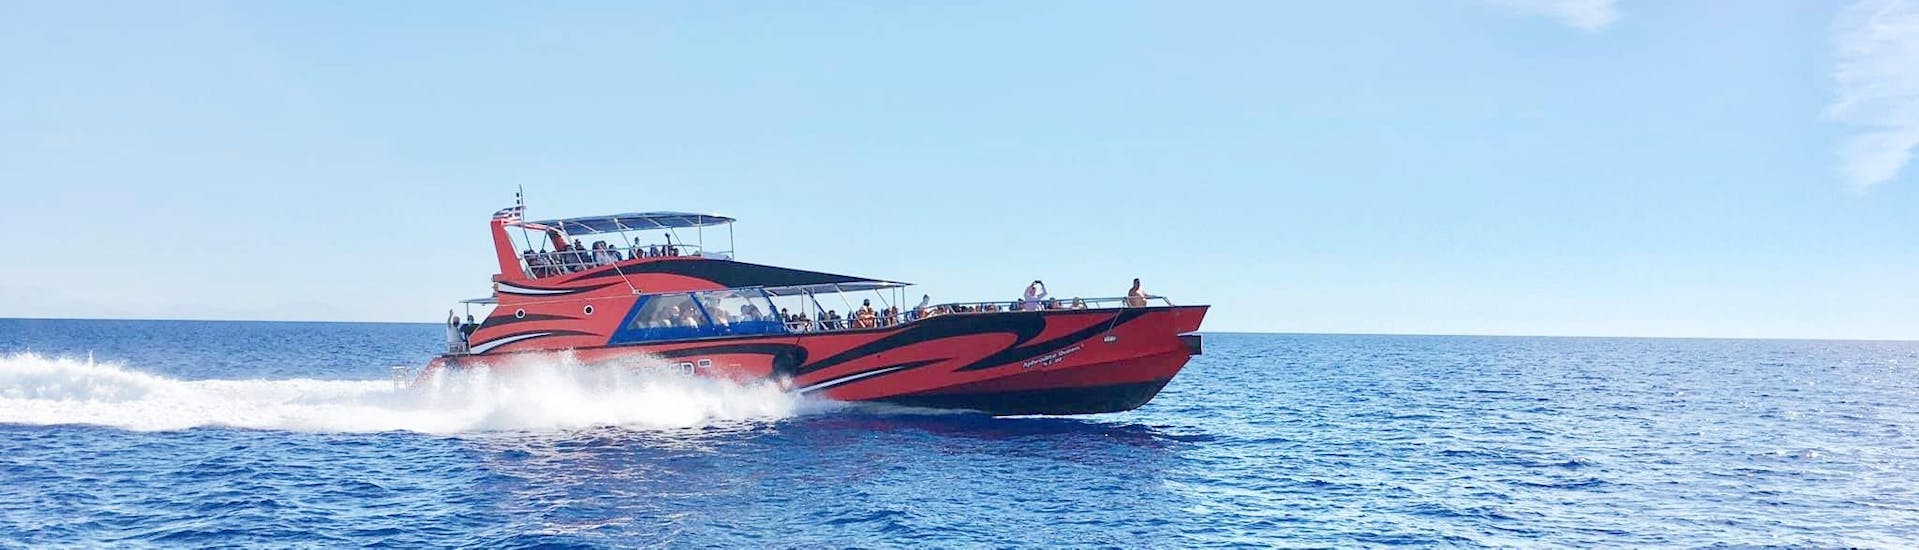 The modern motorboat of Rhodes Sea Lines.